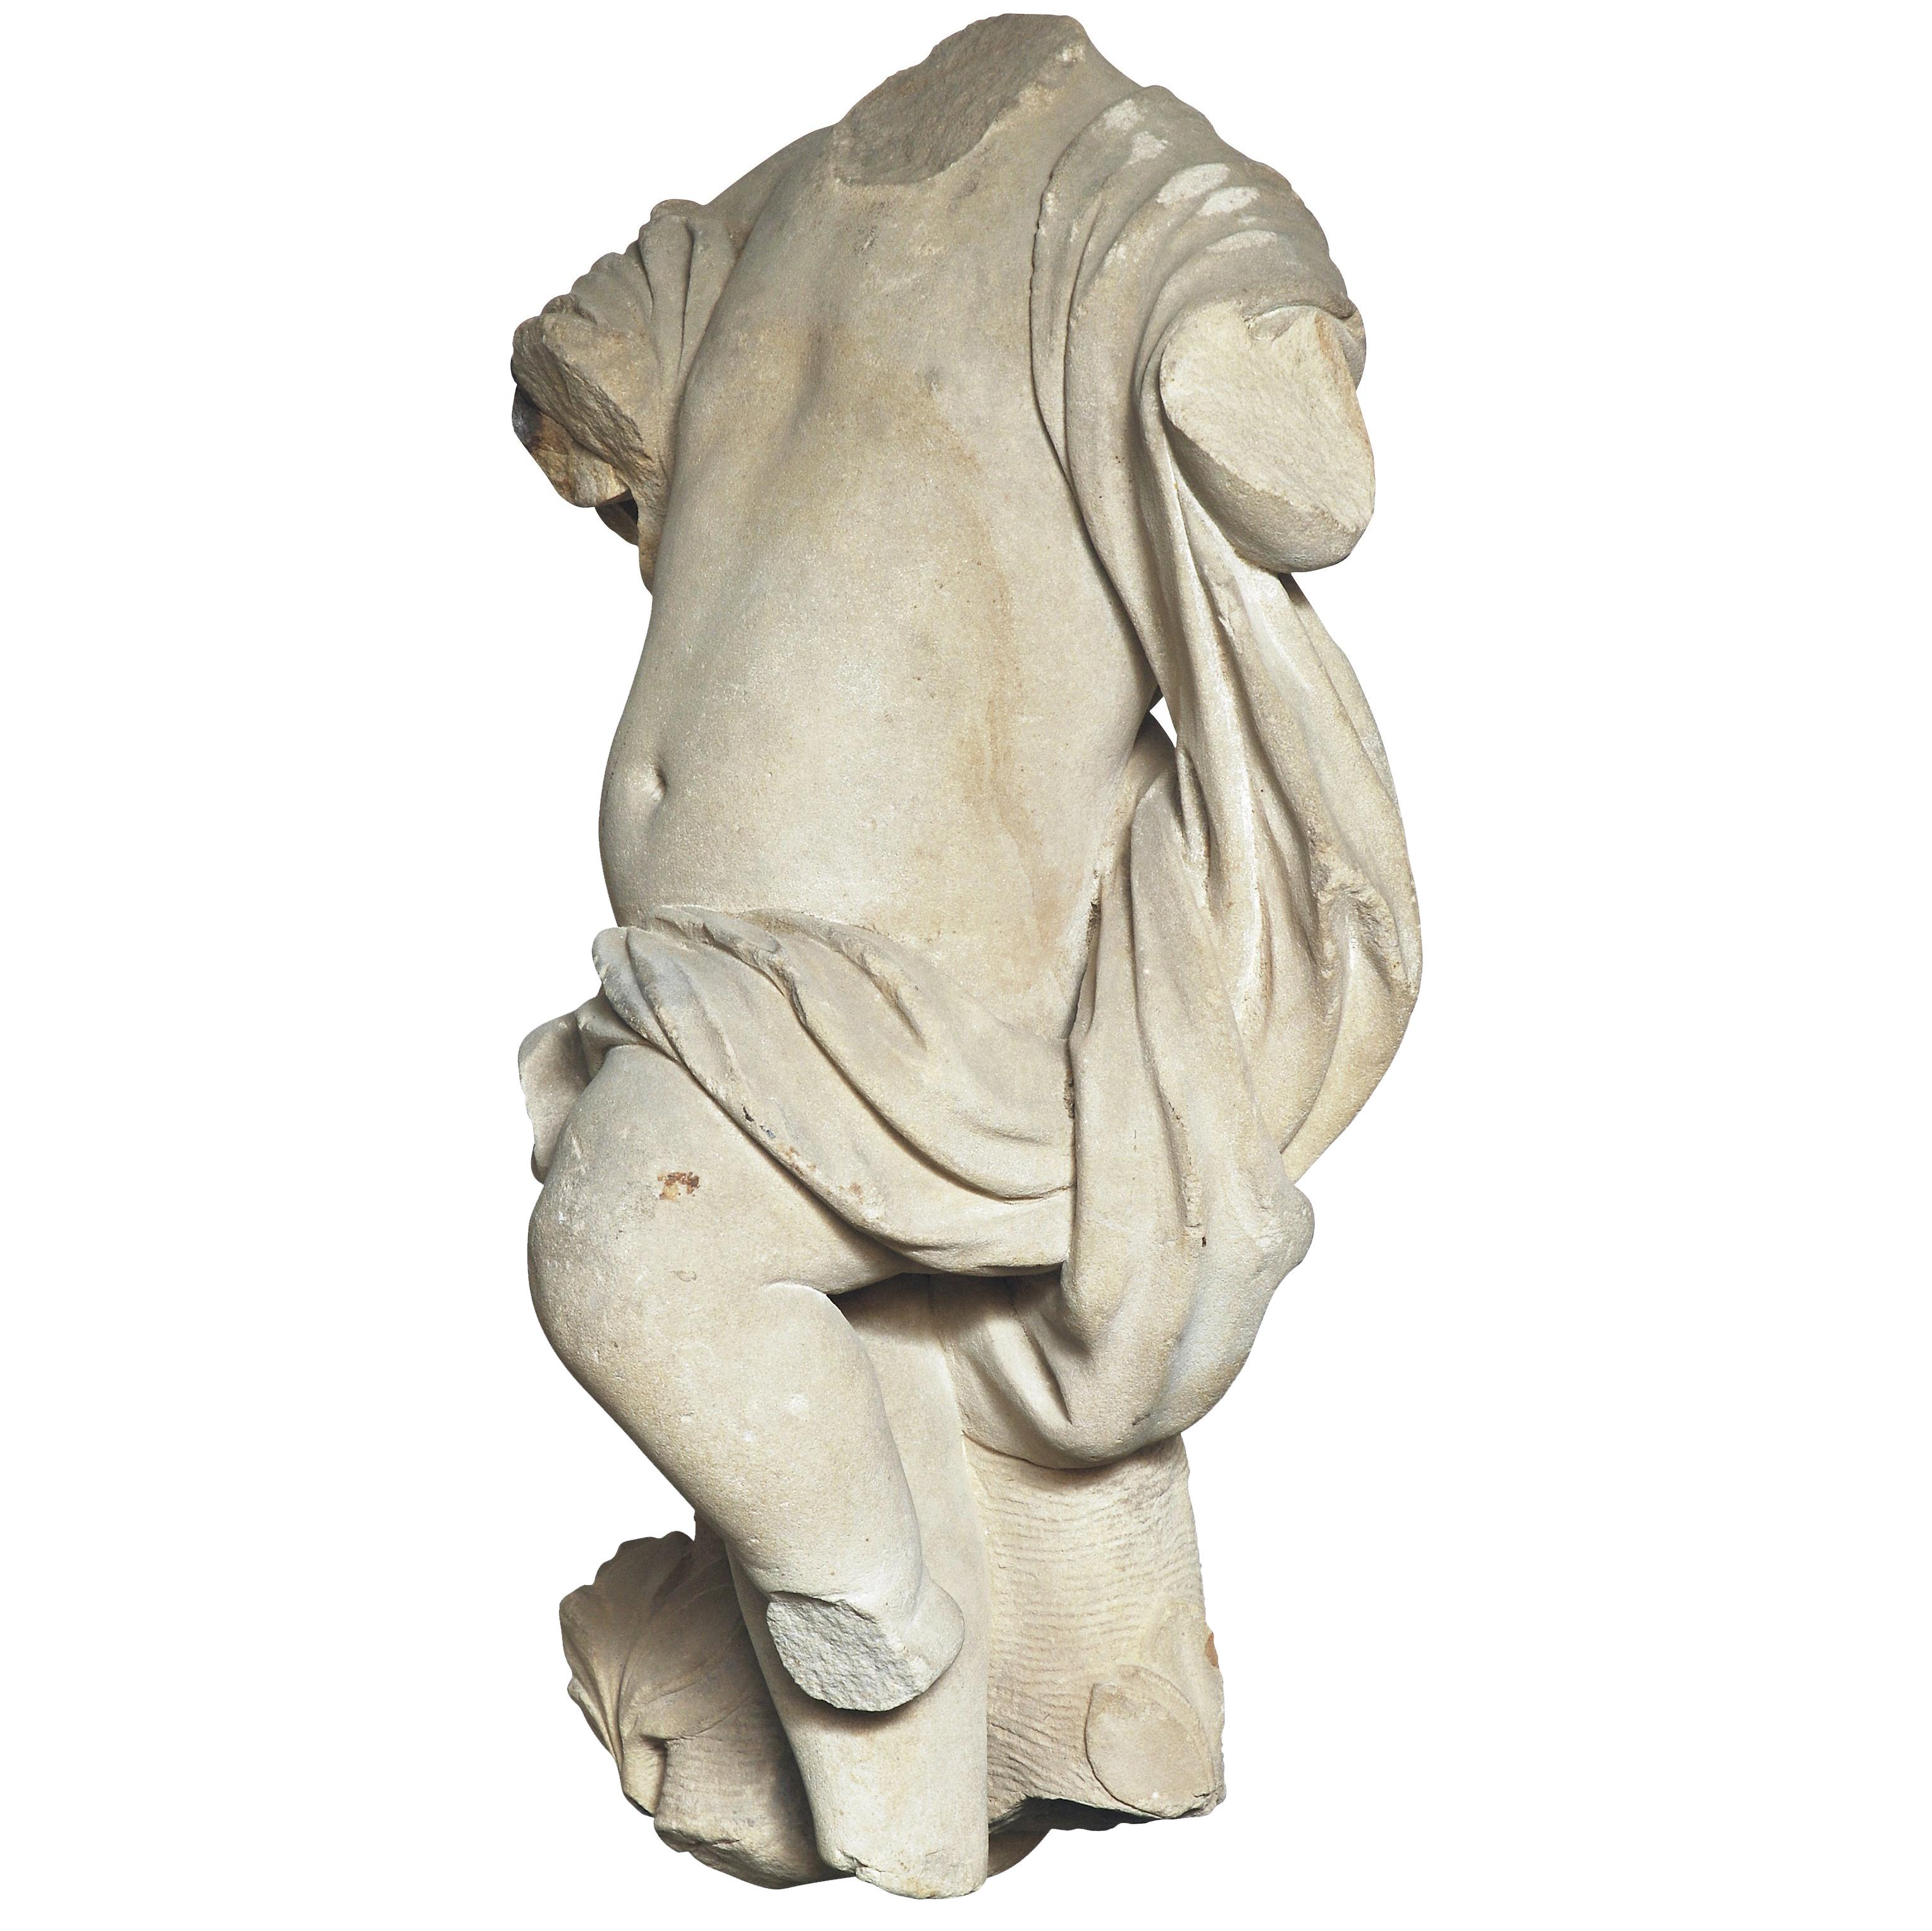 A 17th Century Italian Carved Sandstone Torso of an Infant in Motion For Sale